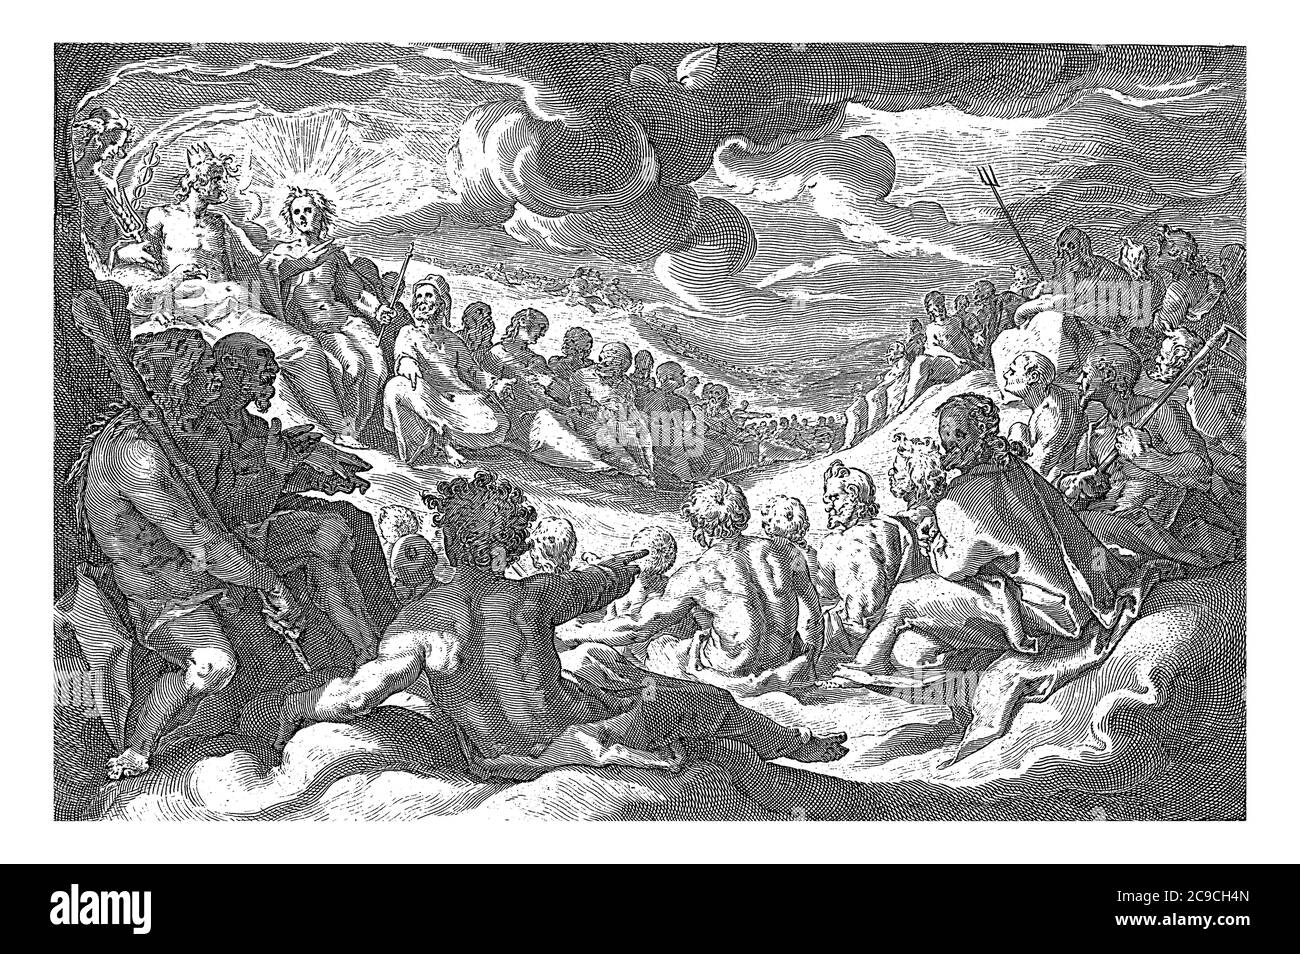 Jupiter summons the gods meeting to take action against sin on earth. The gods have gathered at Jupiter in the back left, vintage engraving. Stock Photo